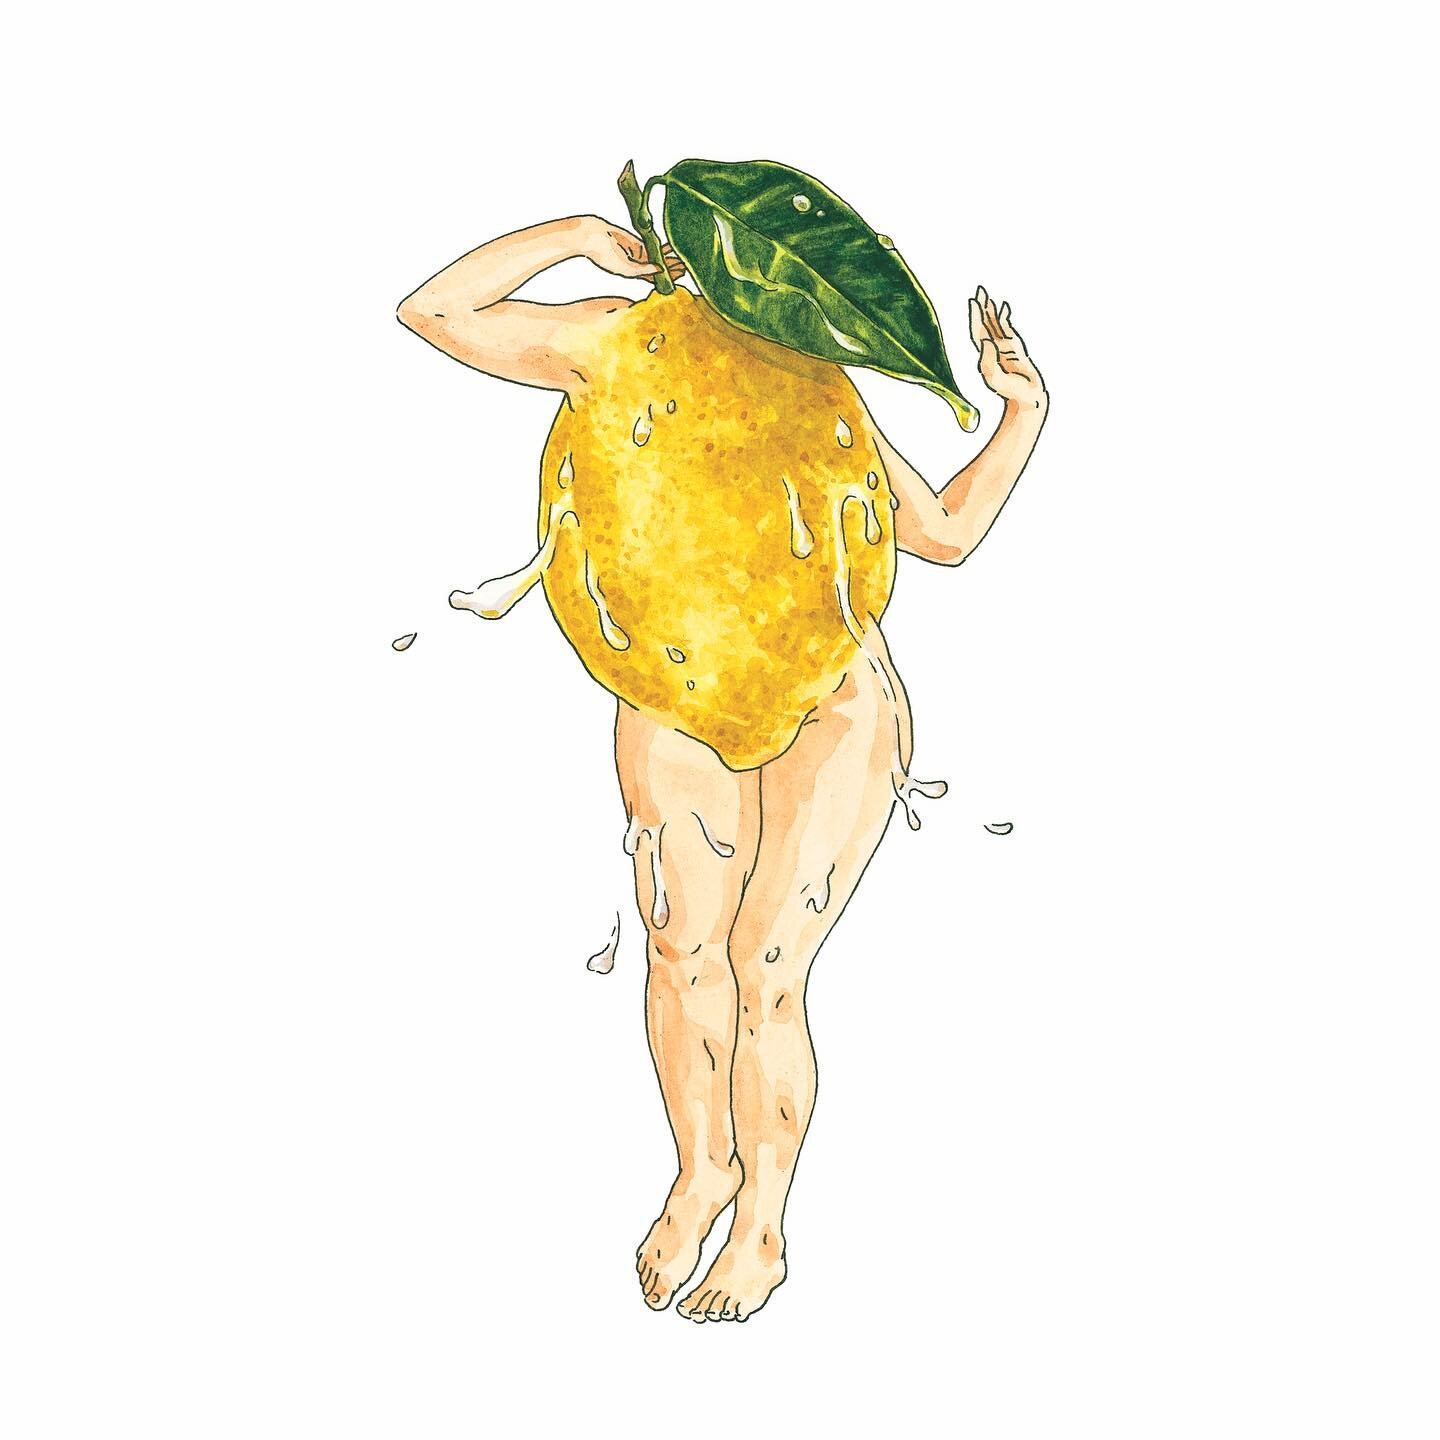 Oh, the lemon dance&hellip; 🍋💦

Was reminded of this piece after seeing a friends story of her dewy lemon today ~&gt; swipe to see 👀 @chloegraystudio 🫶✨

Added a couple prints to the shop for y&rsquo;all 😉 ~ link in bio

Pose inspo here was of M